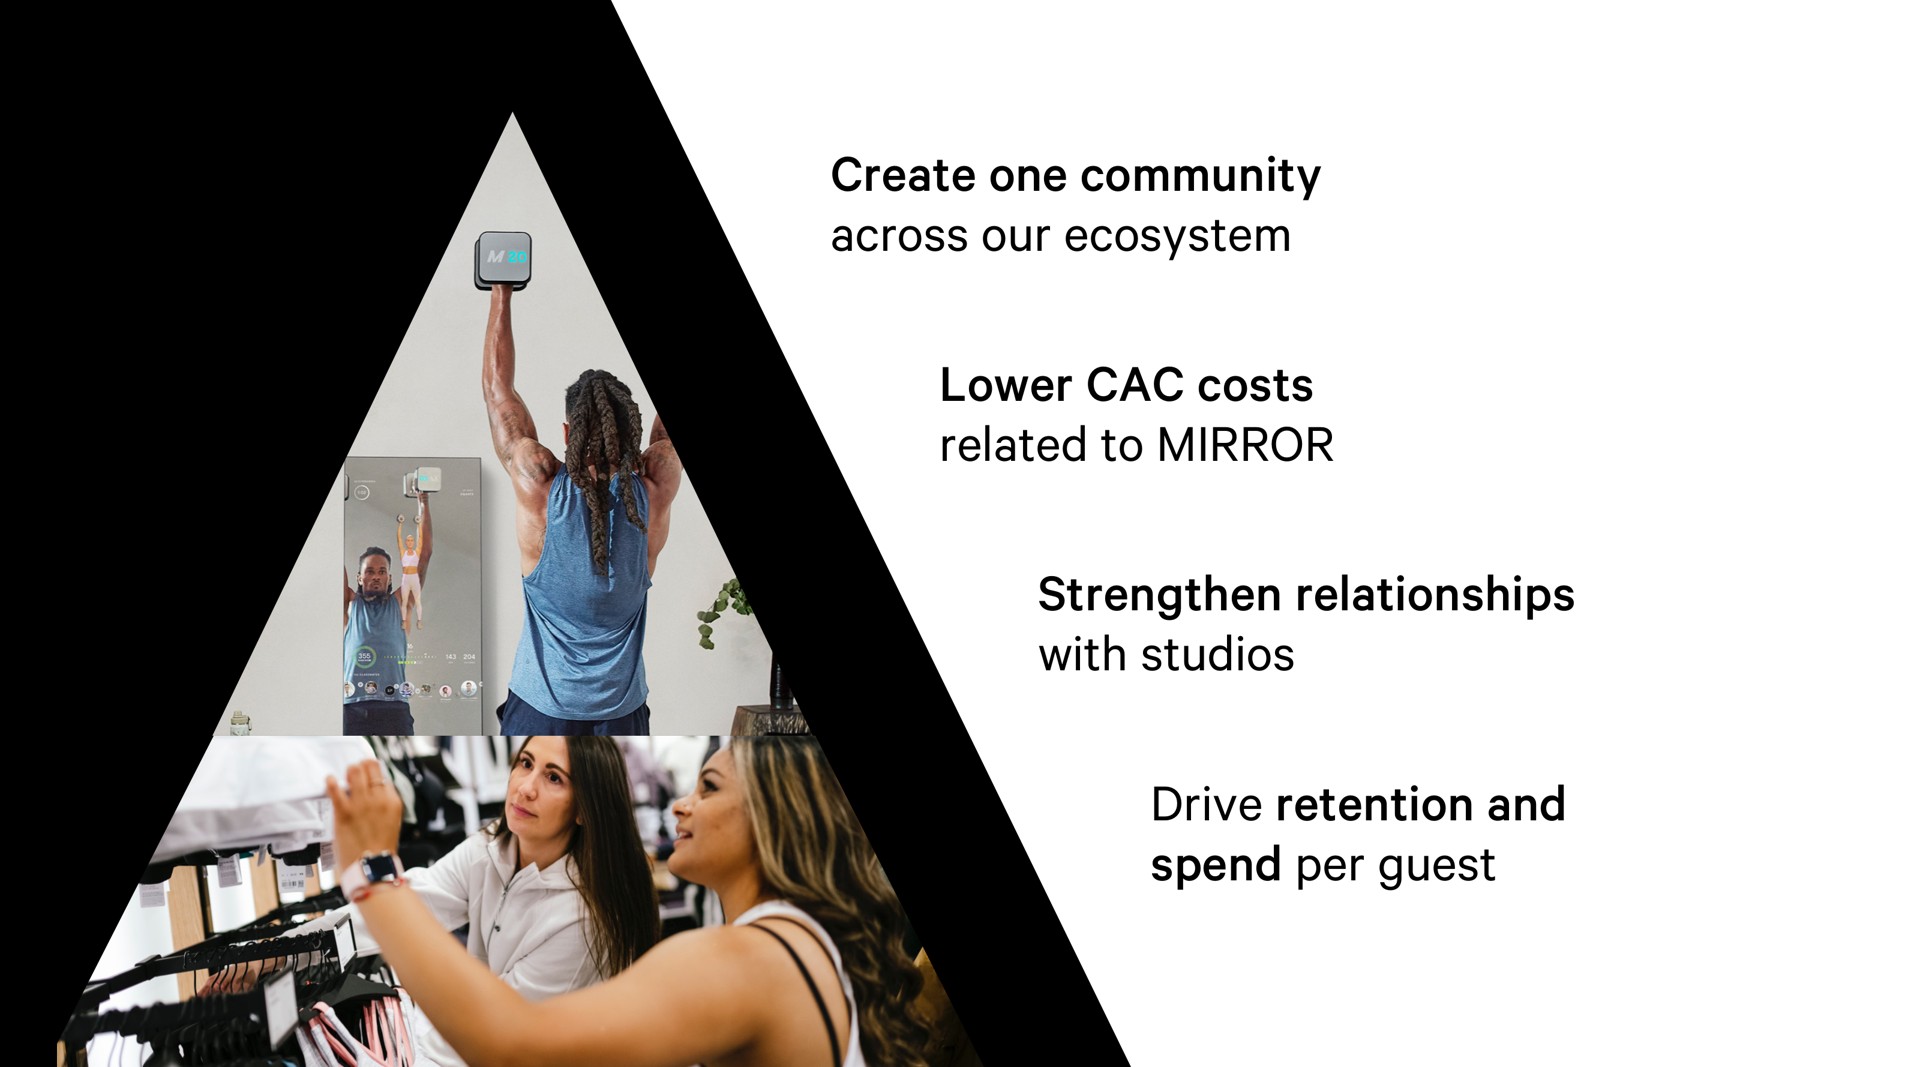 imagining the future of membership pinnacle create one community across our ecosystem lower costs related to mirror strengthen relationships with studios drive retention and spend per guest | Lululemon